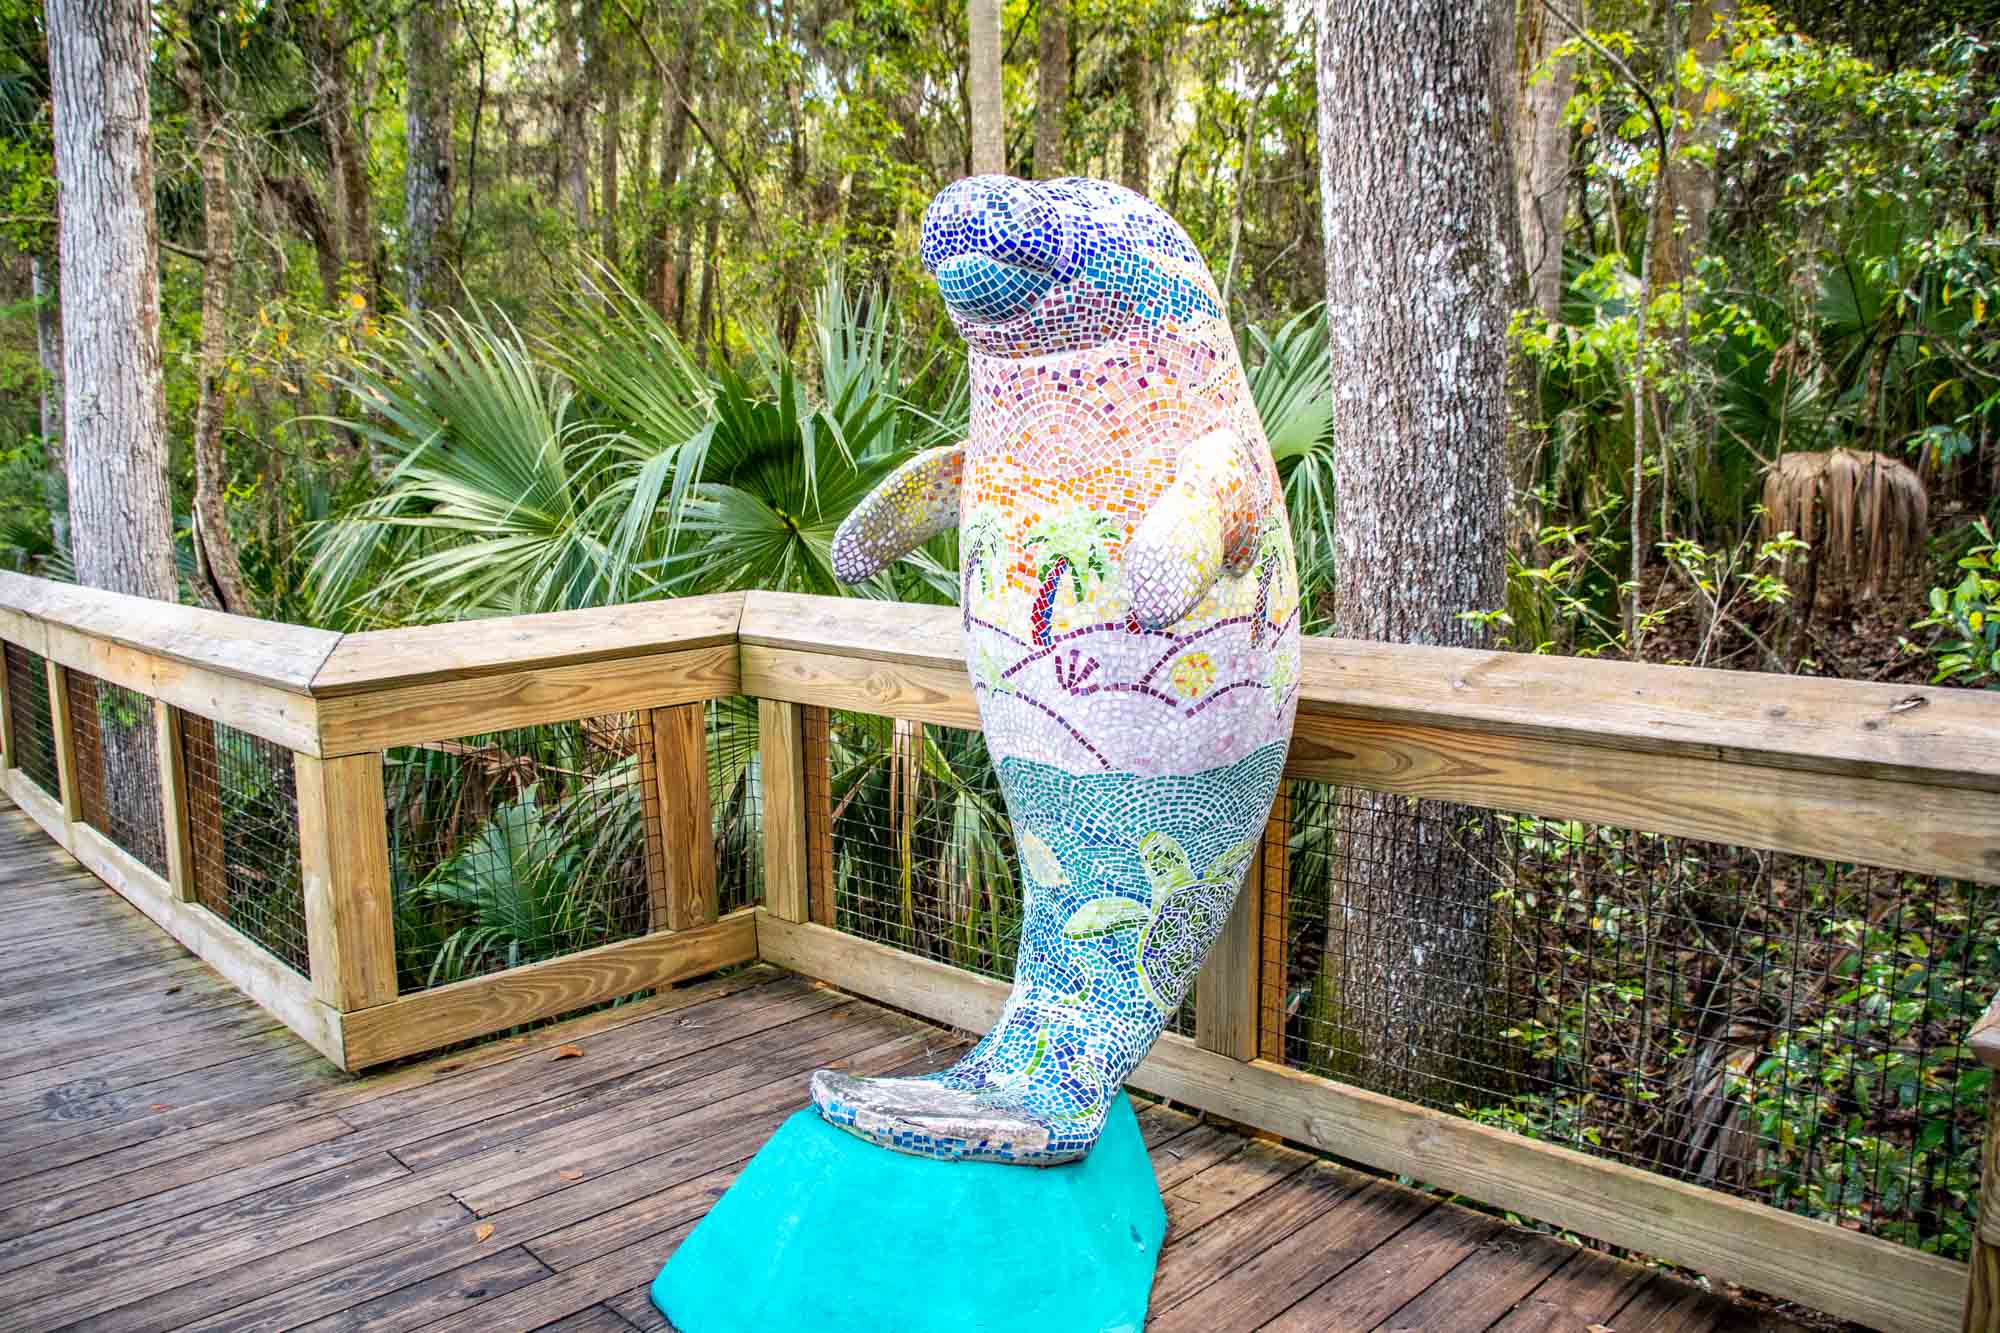 Colorful mosaic manatee statue on wooden boardwalk